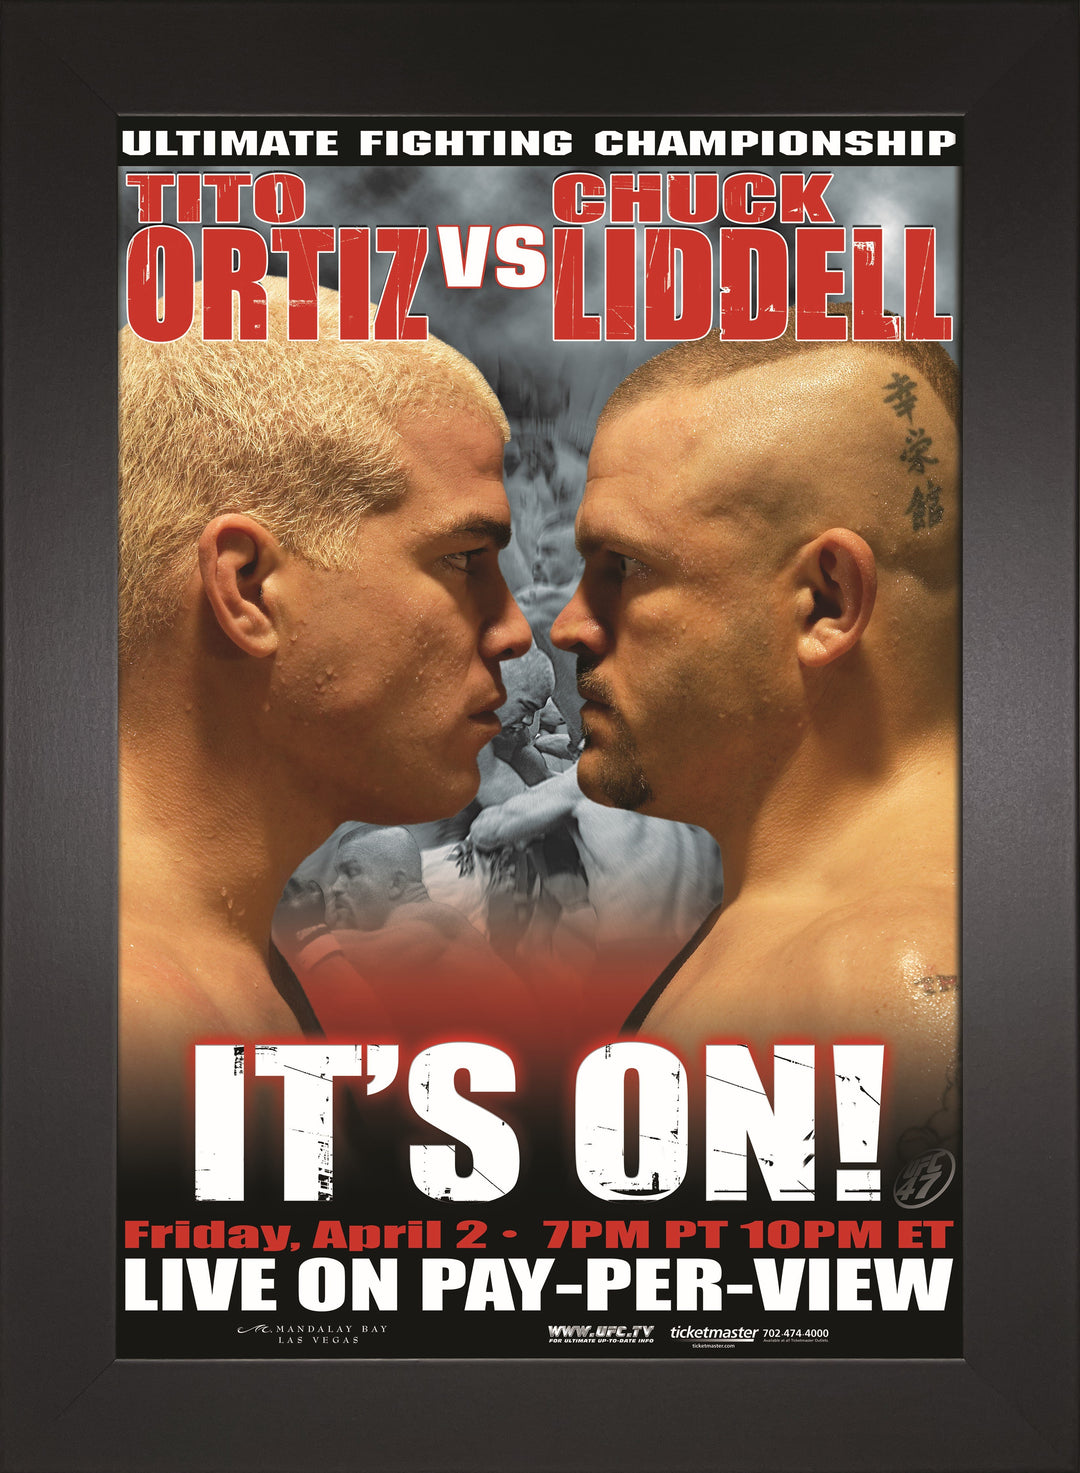 UFC 47: It's On! Replica Mini Framed 9x13 Event Poster